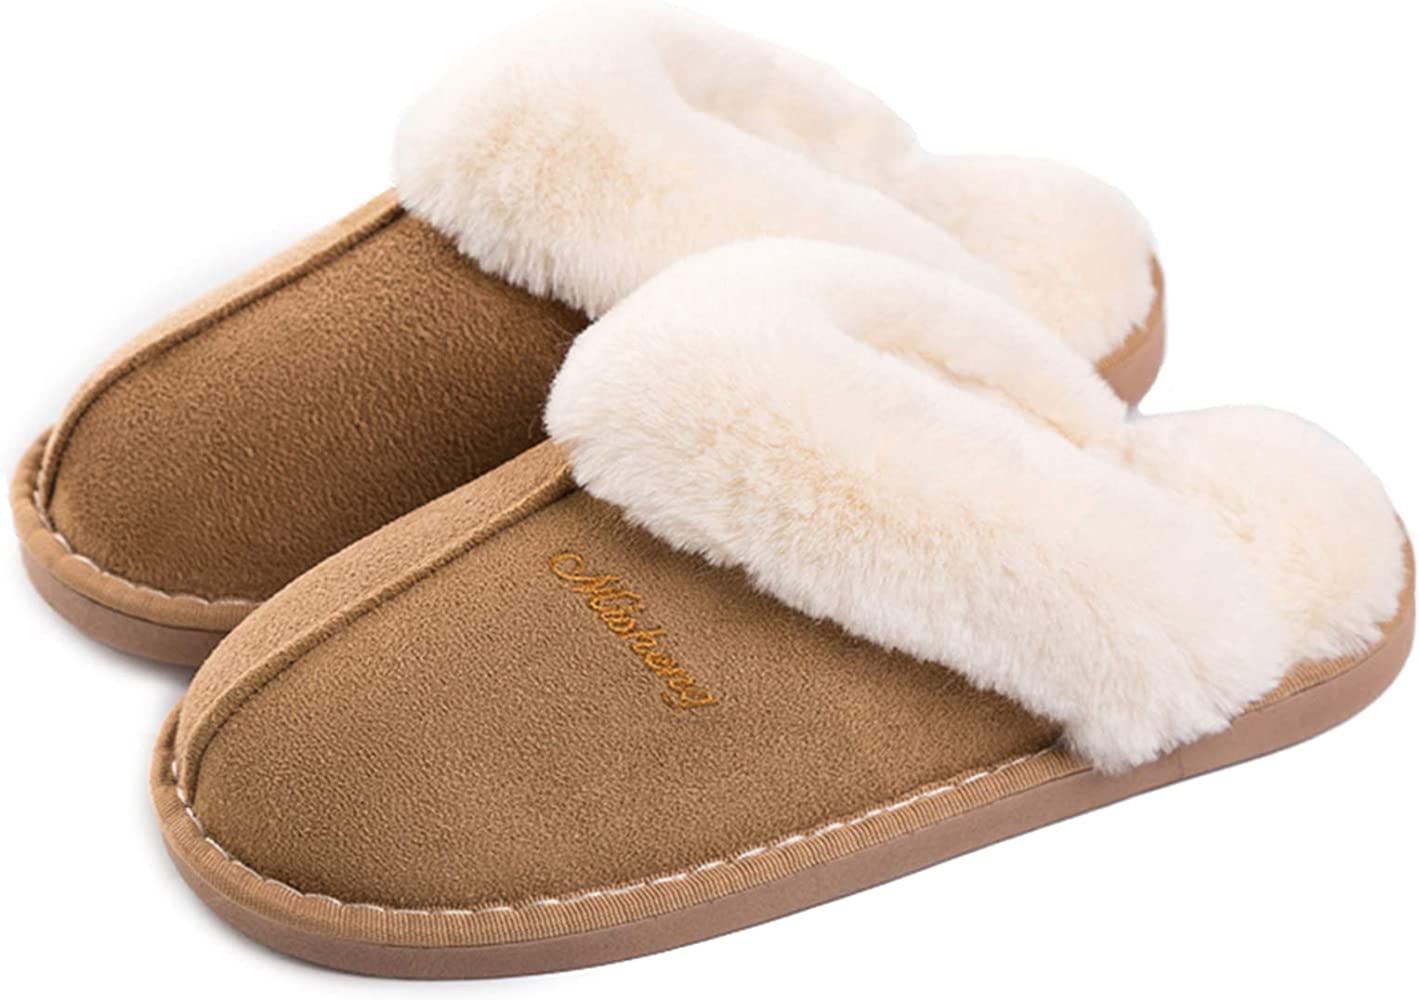 Womens Slipper Memory Foam Fluffy Slip-on House Suede Fur Lined/Anti-Skid Sole, Indoor & Outdoor | Amazon (UK)